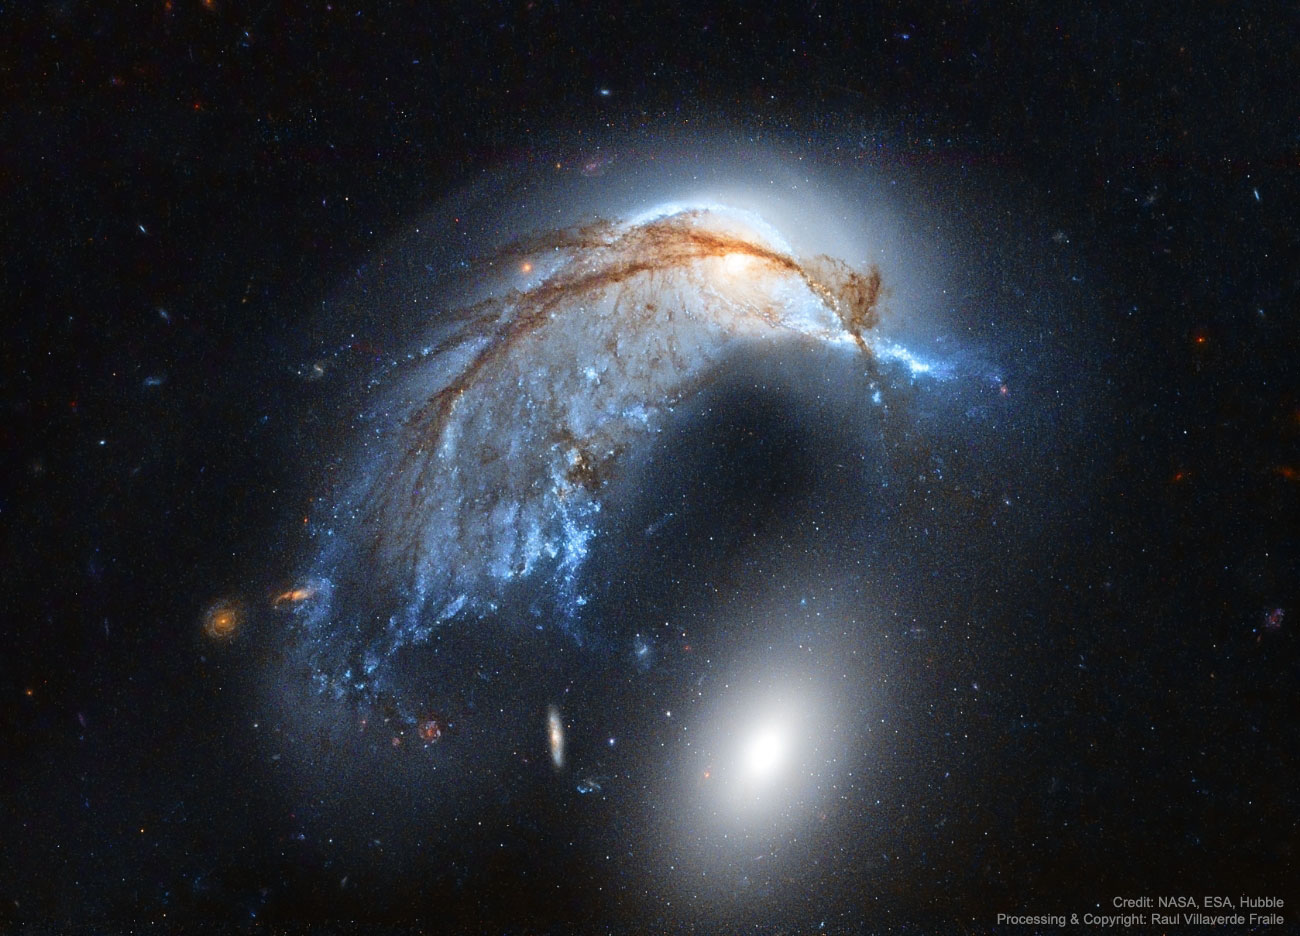 Astronomy Picture of the Day - Σελίδα 3 PorpoiseGalaxy_HubbleFraile_1300